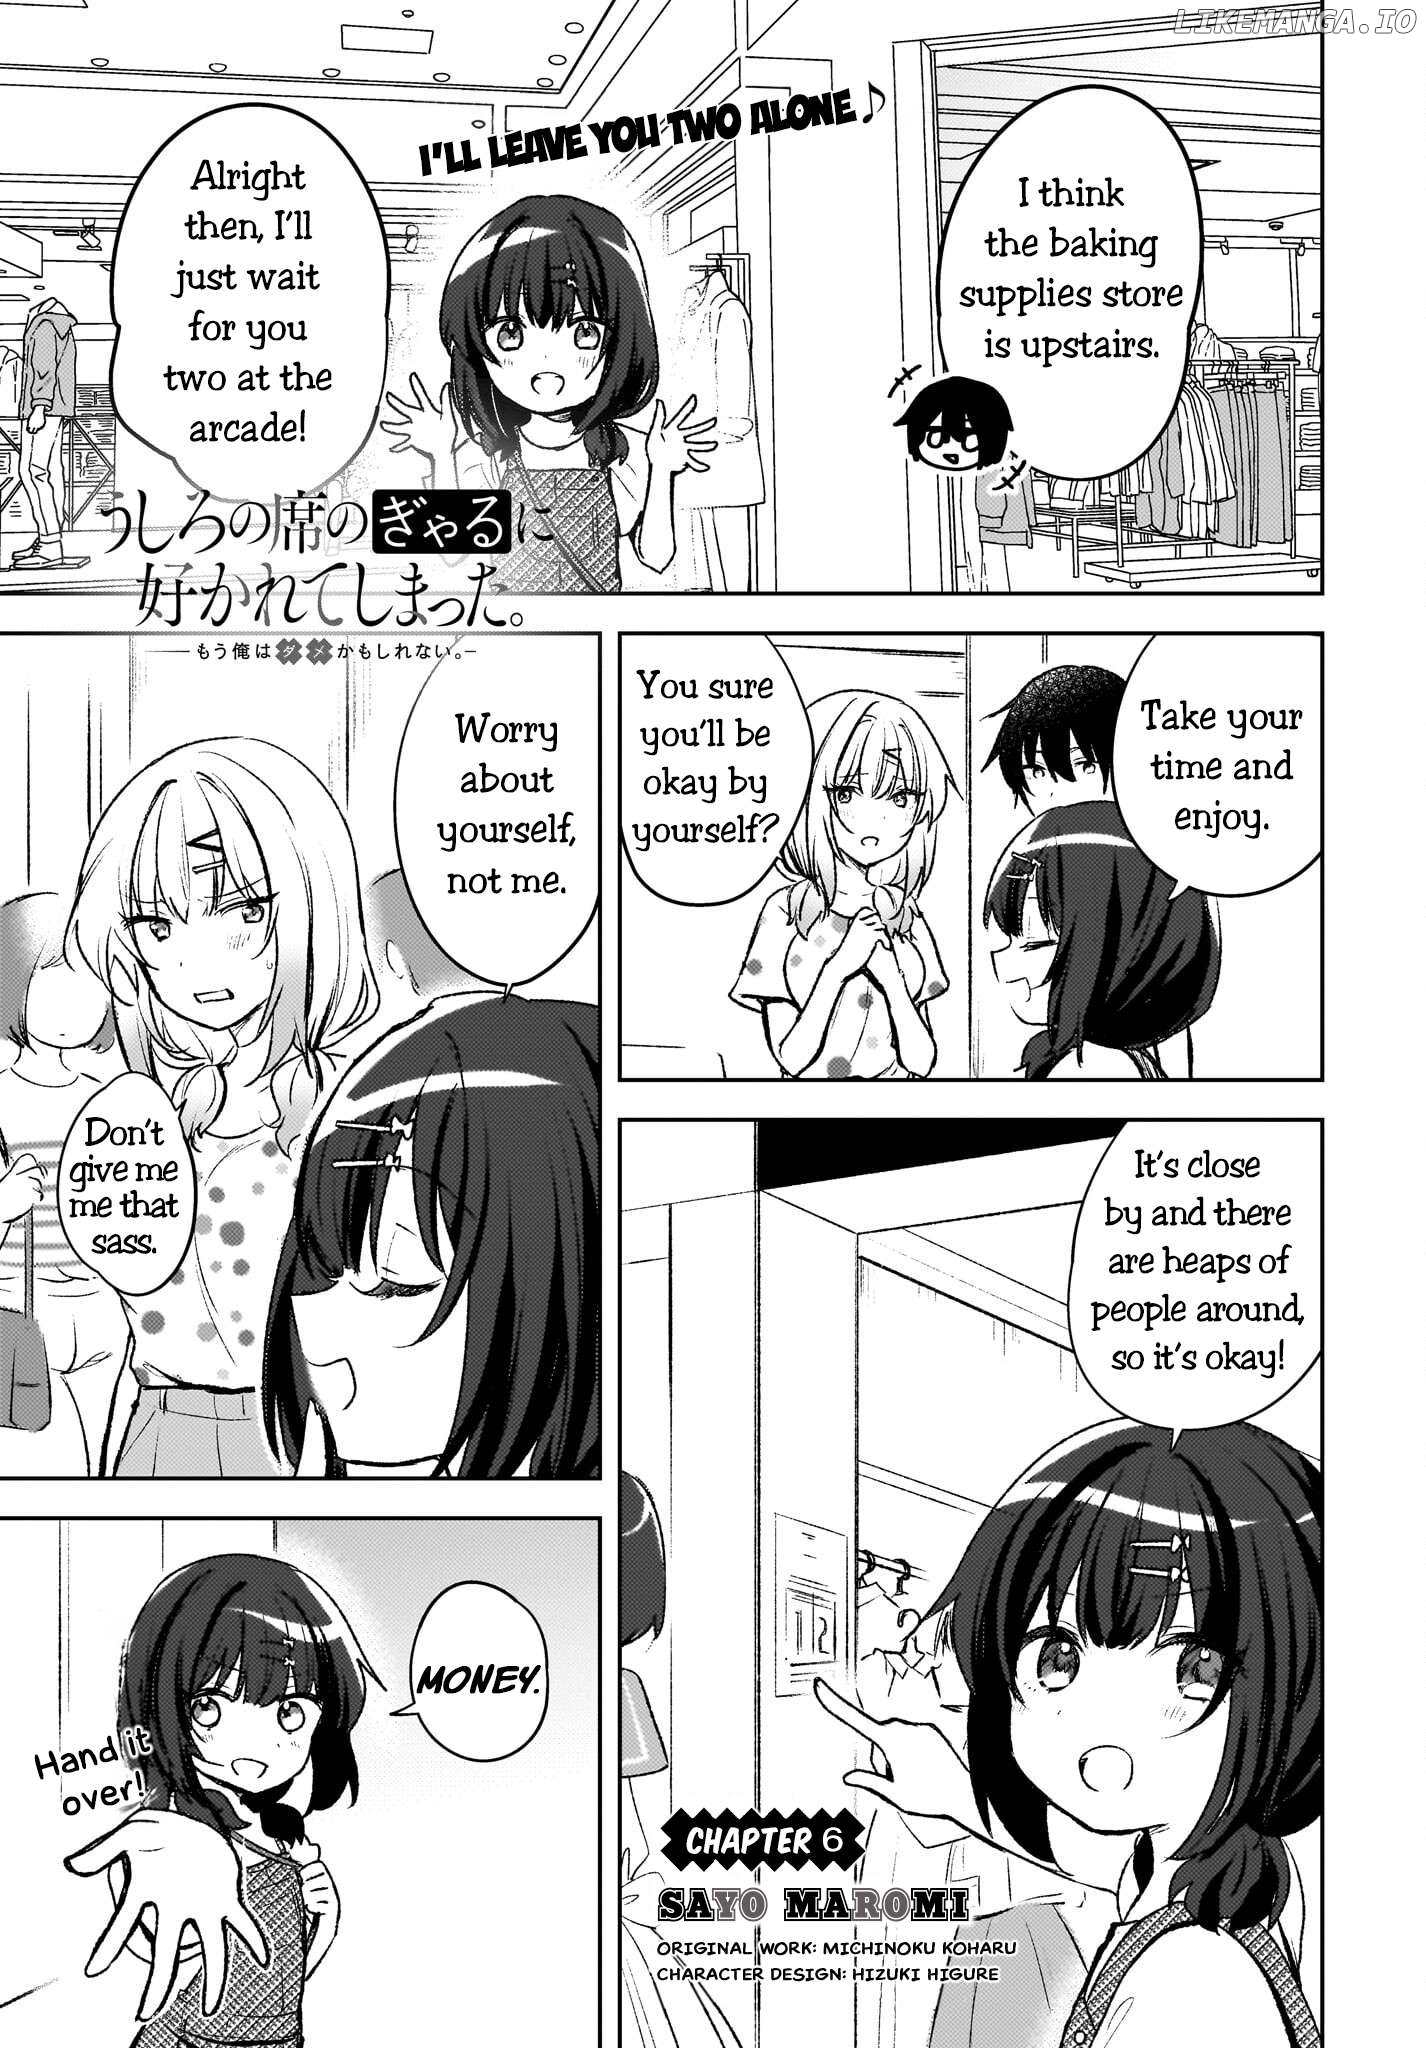 The Gal Sitting Behind Me Likes Me -Maybe I'm Screwed Already- Chapter 6 - page 1